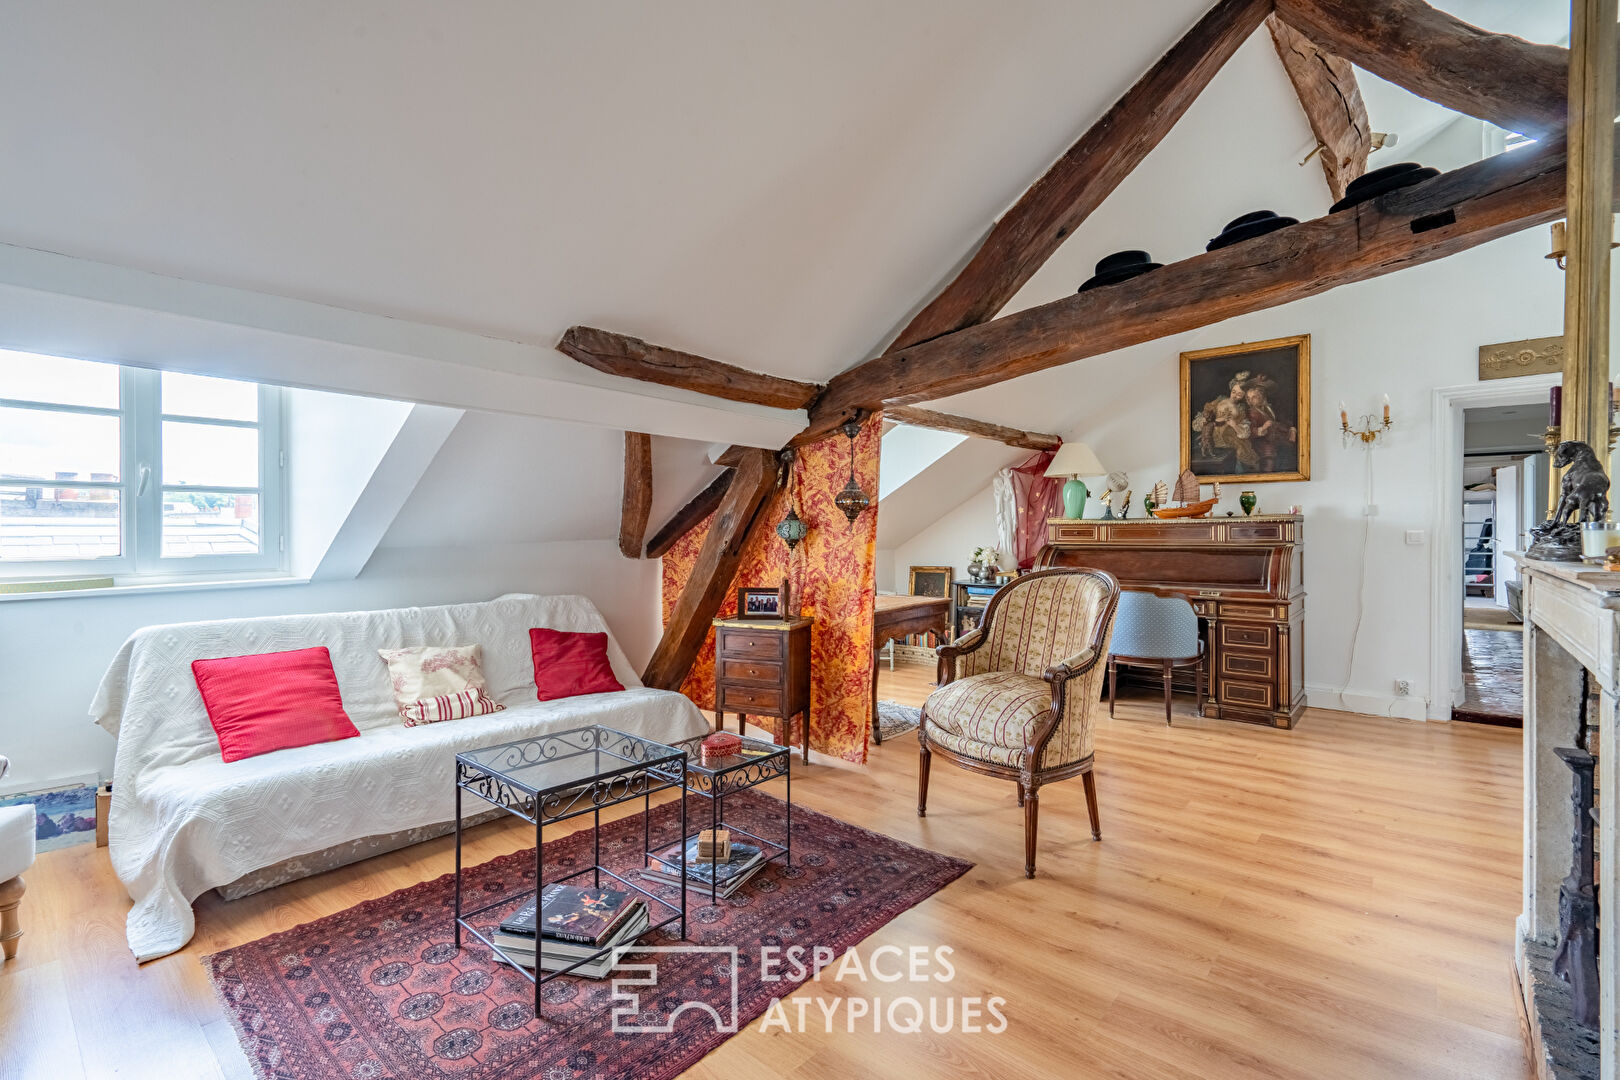 Large atypical family apartment in historic Versailles district